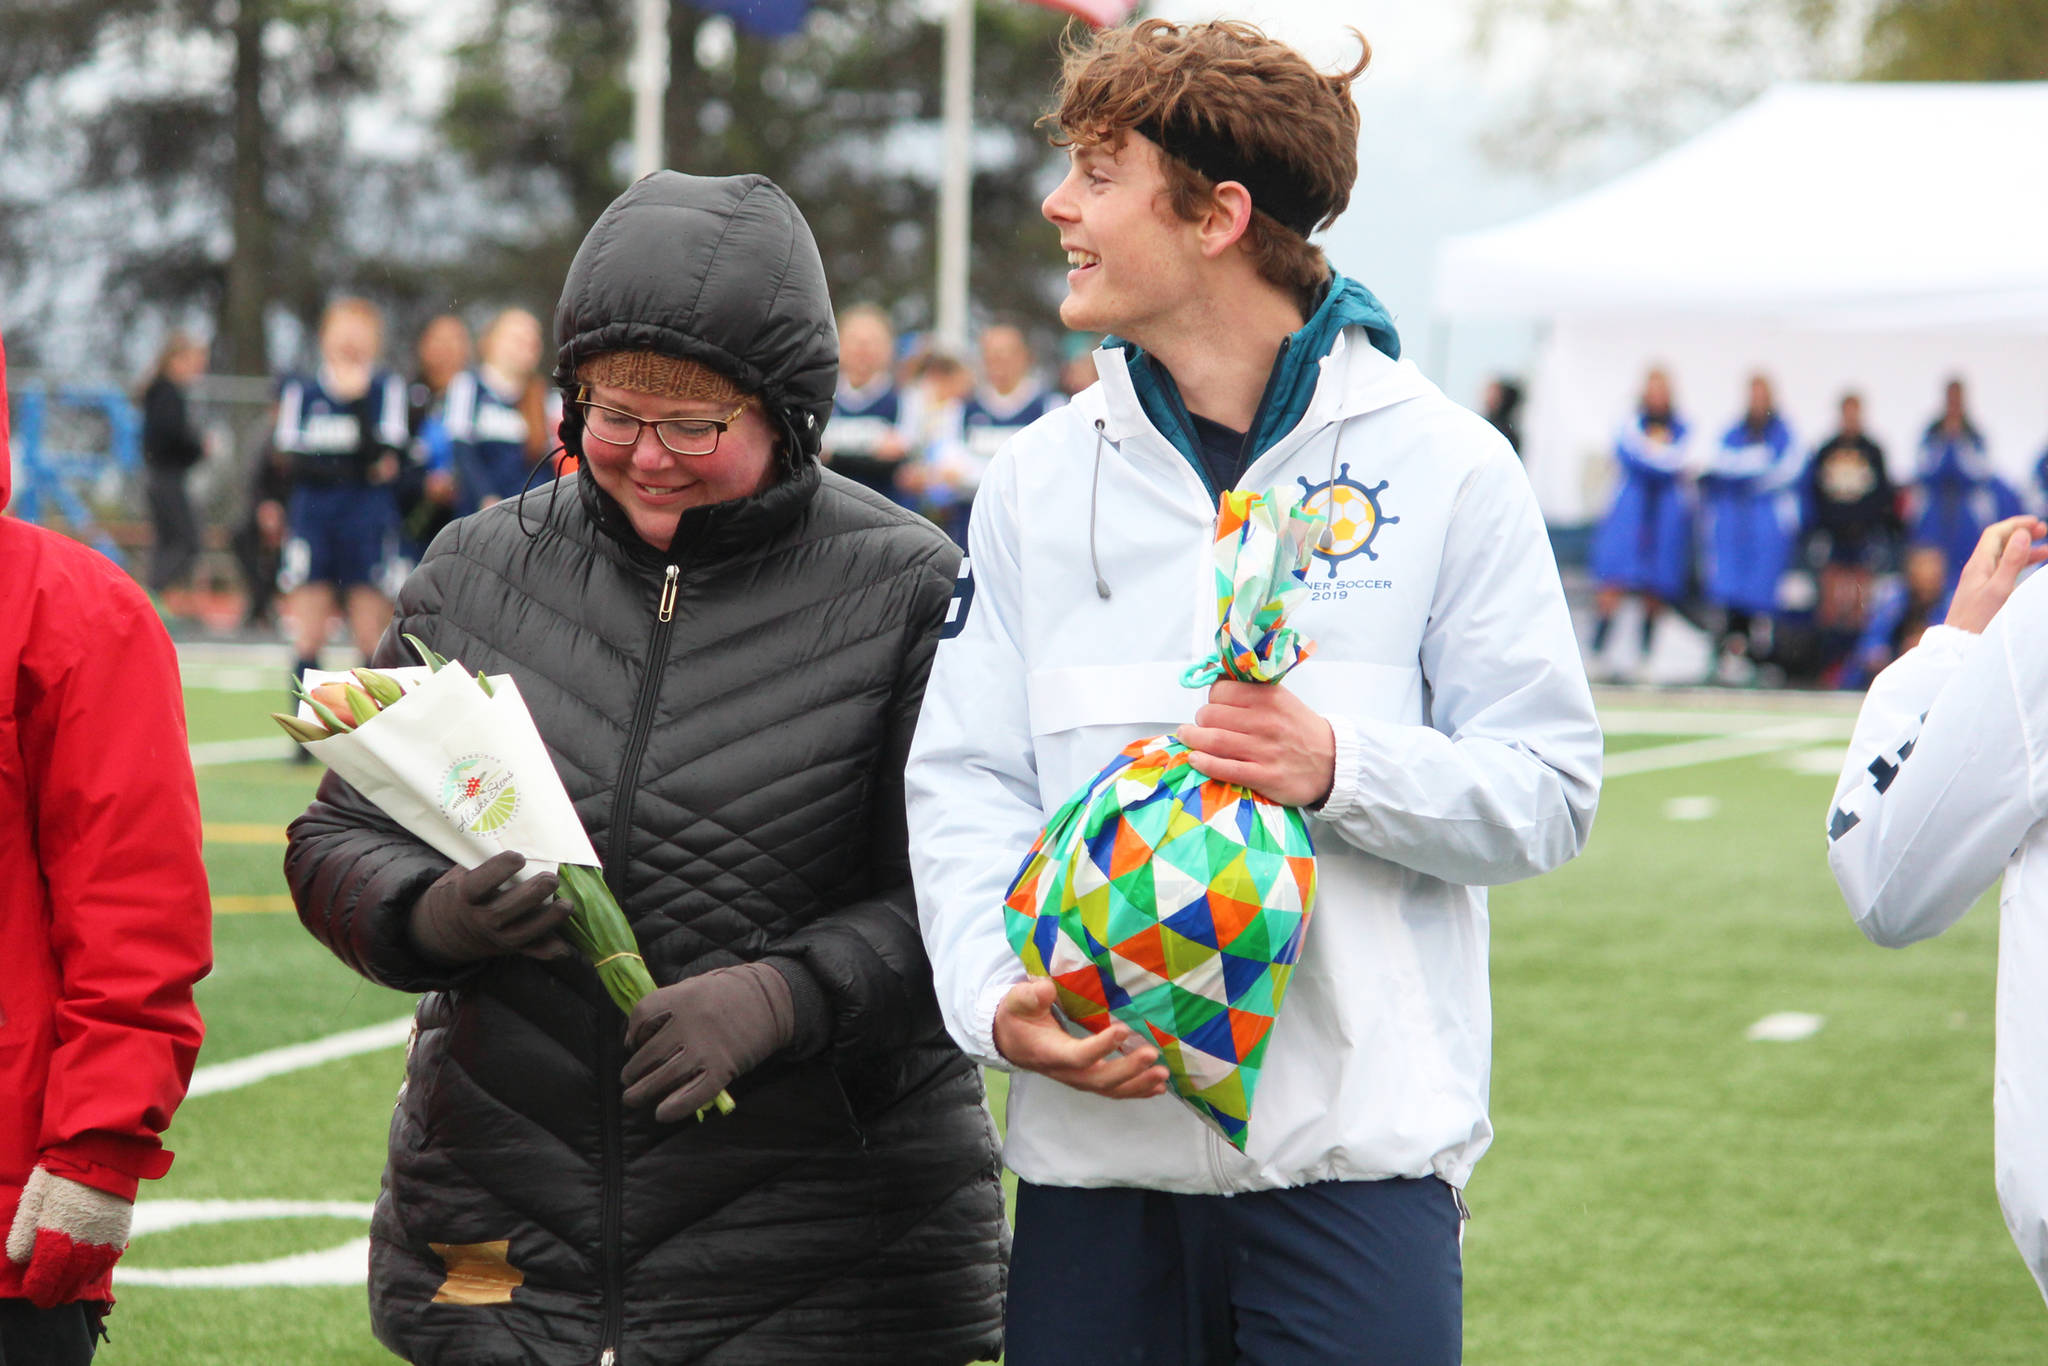 Defender Avram Salzmann stands with his mother while being recognized during a Senior Night celebration between the girls and boys soccer games against Thunder Mountain on Friday, May 10, 2019 at Homer High School in Homer, Alaska. (Photo by Megan Pacer/Homer News)